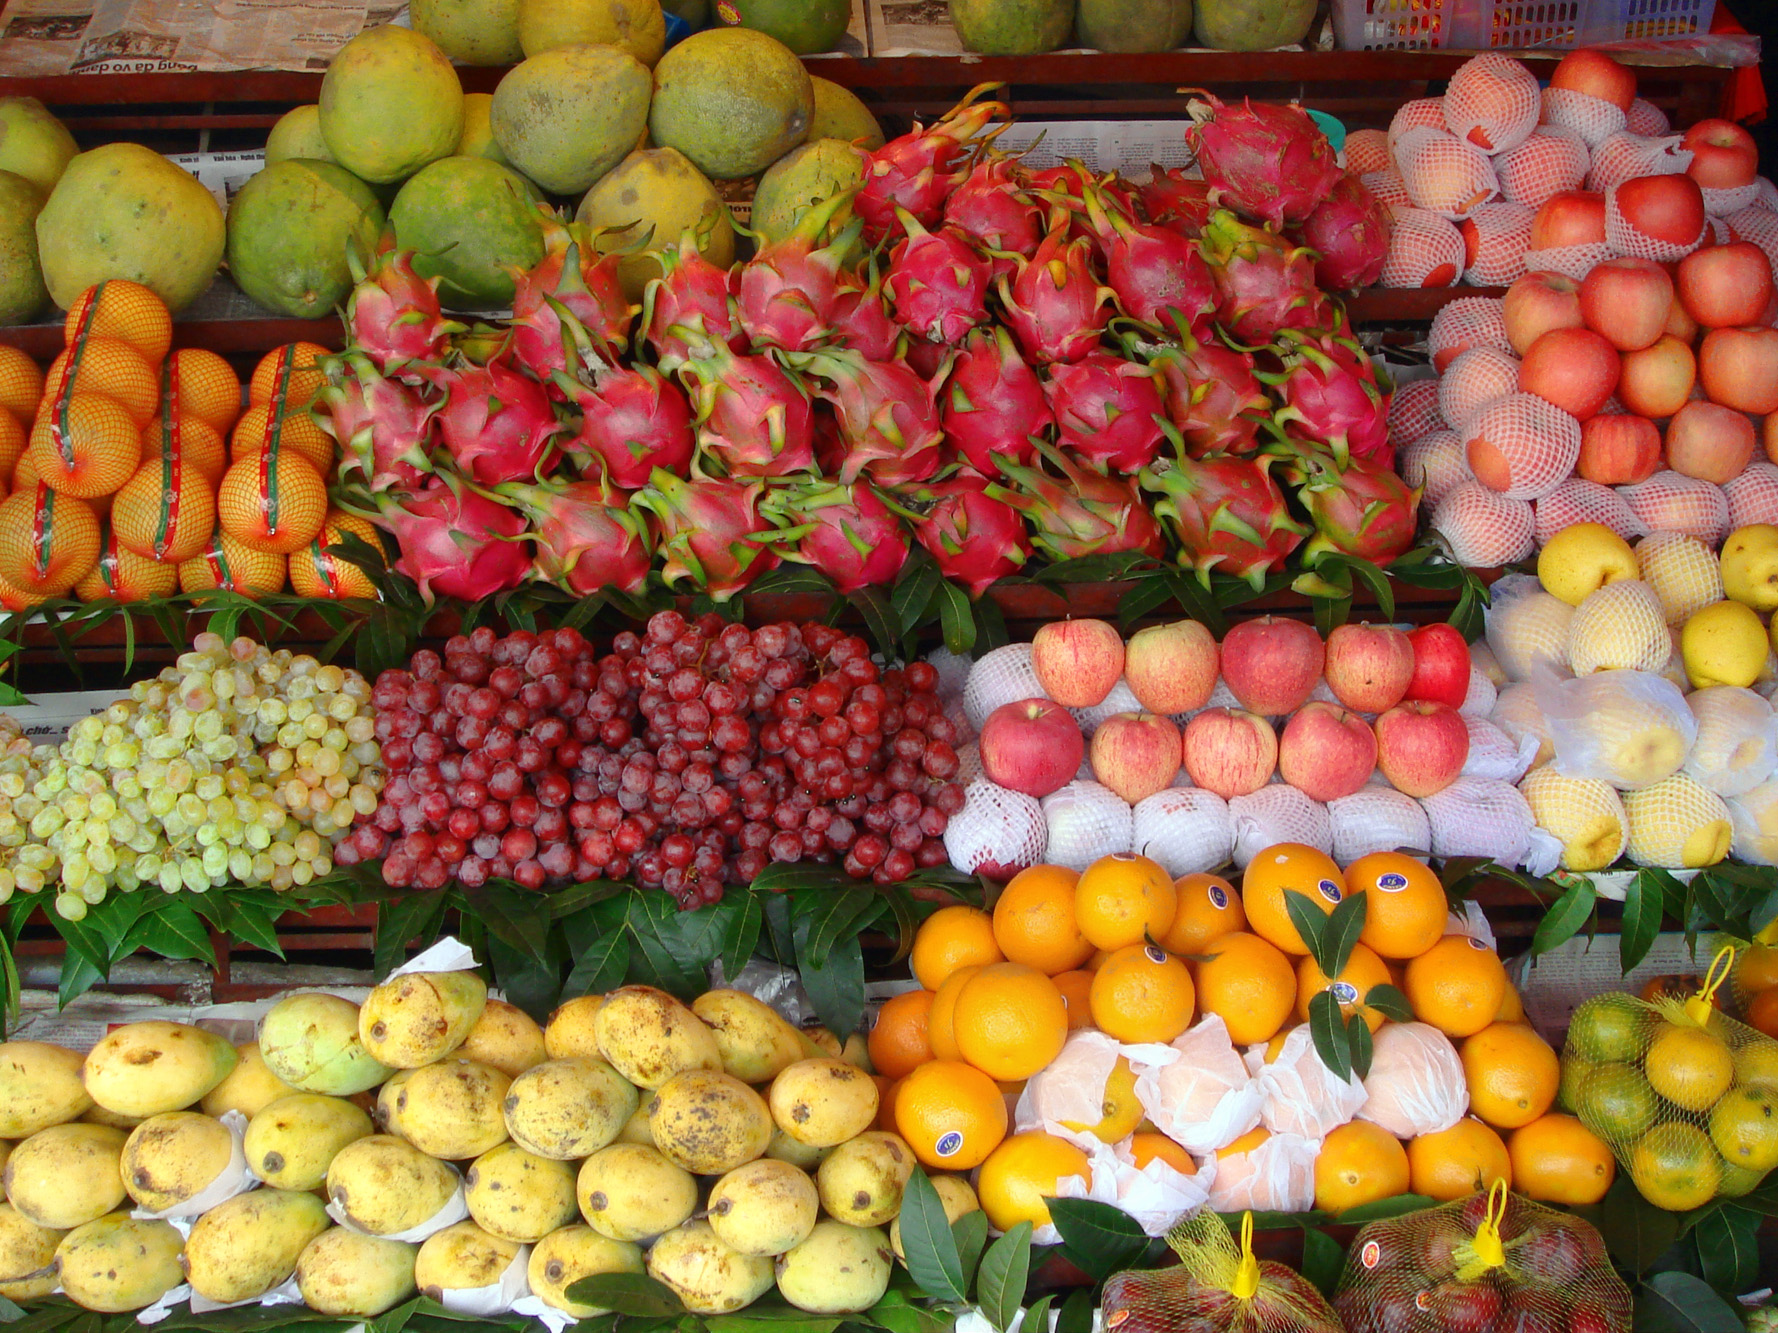 a variety of fruits sit on shelves in a store